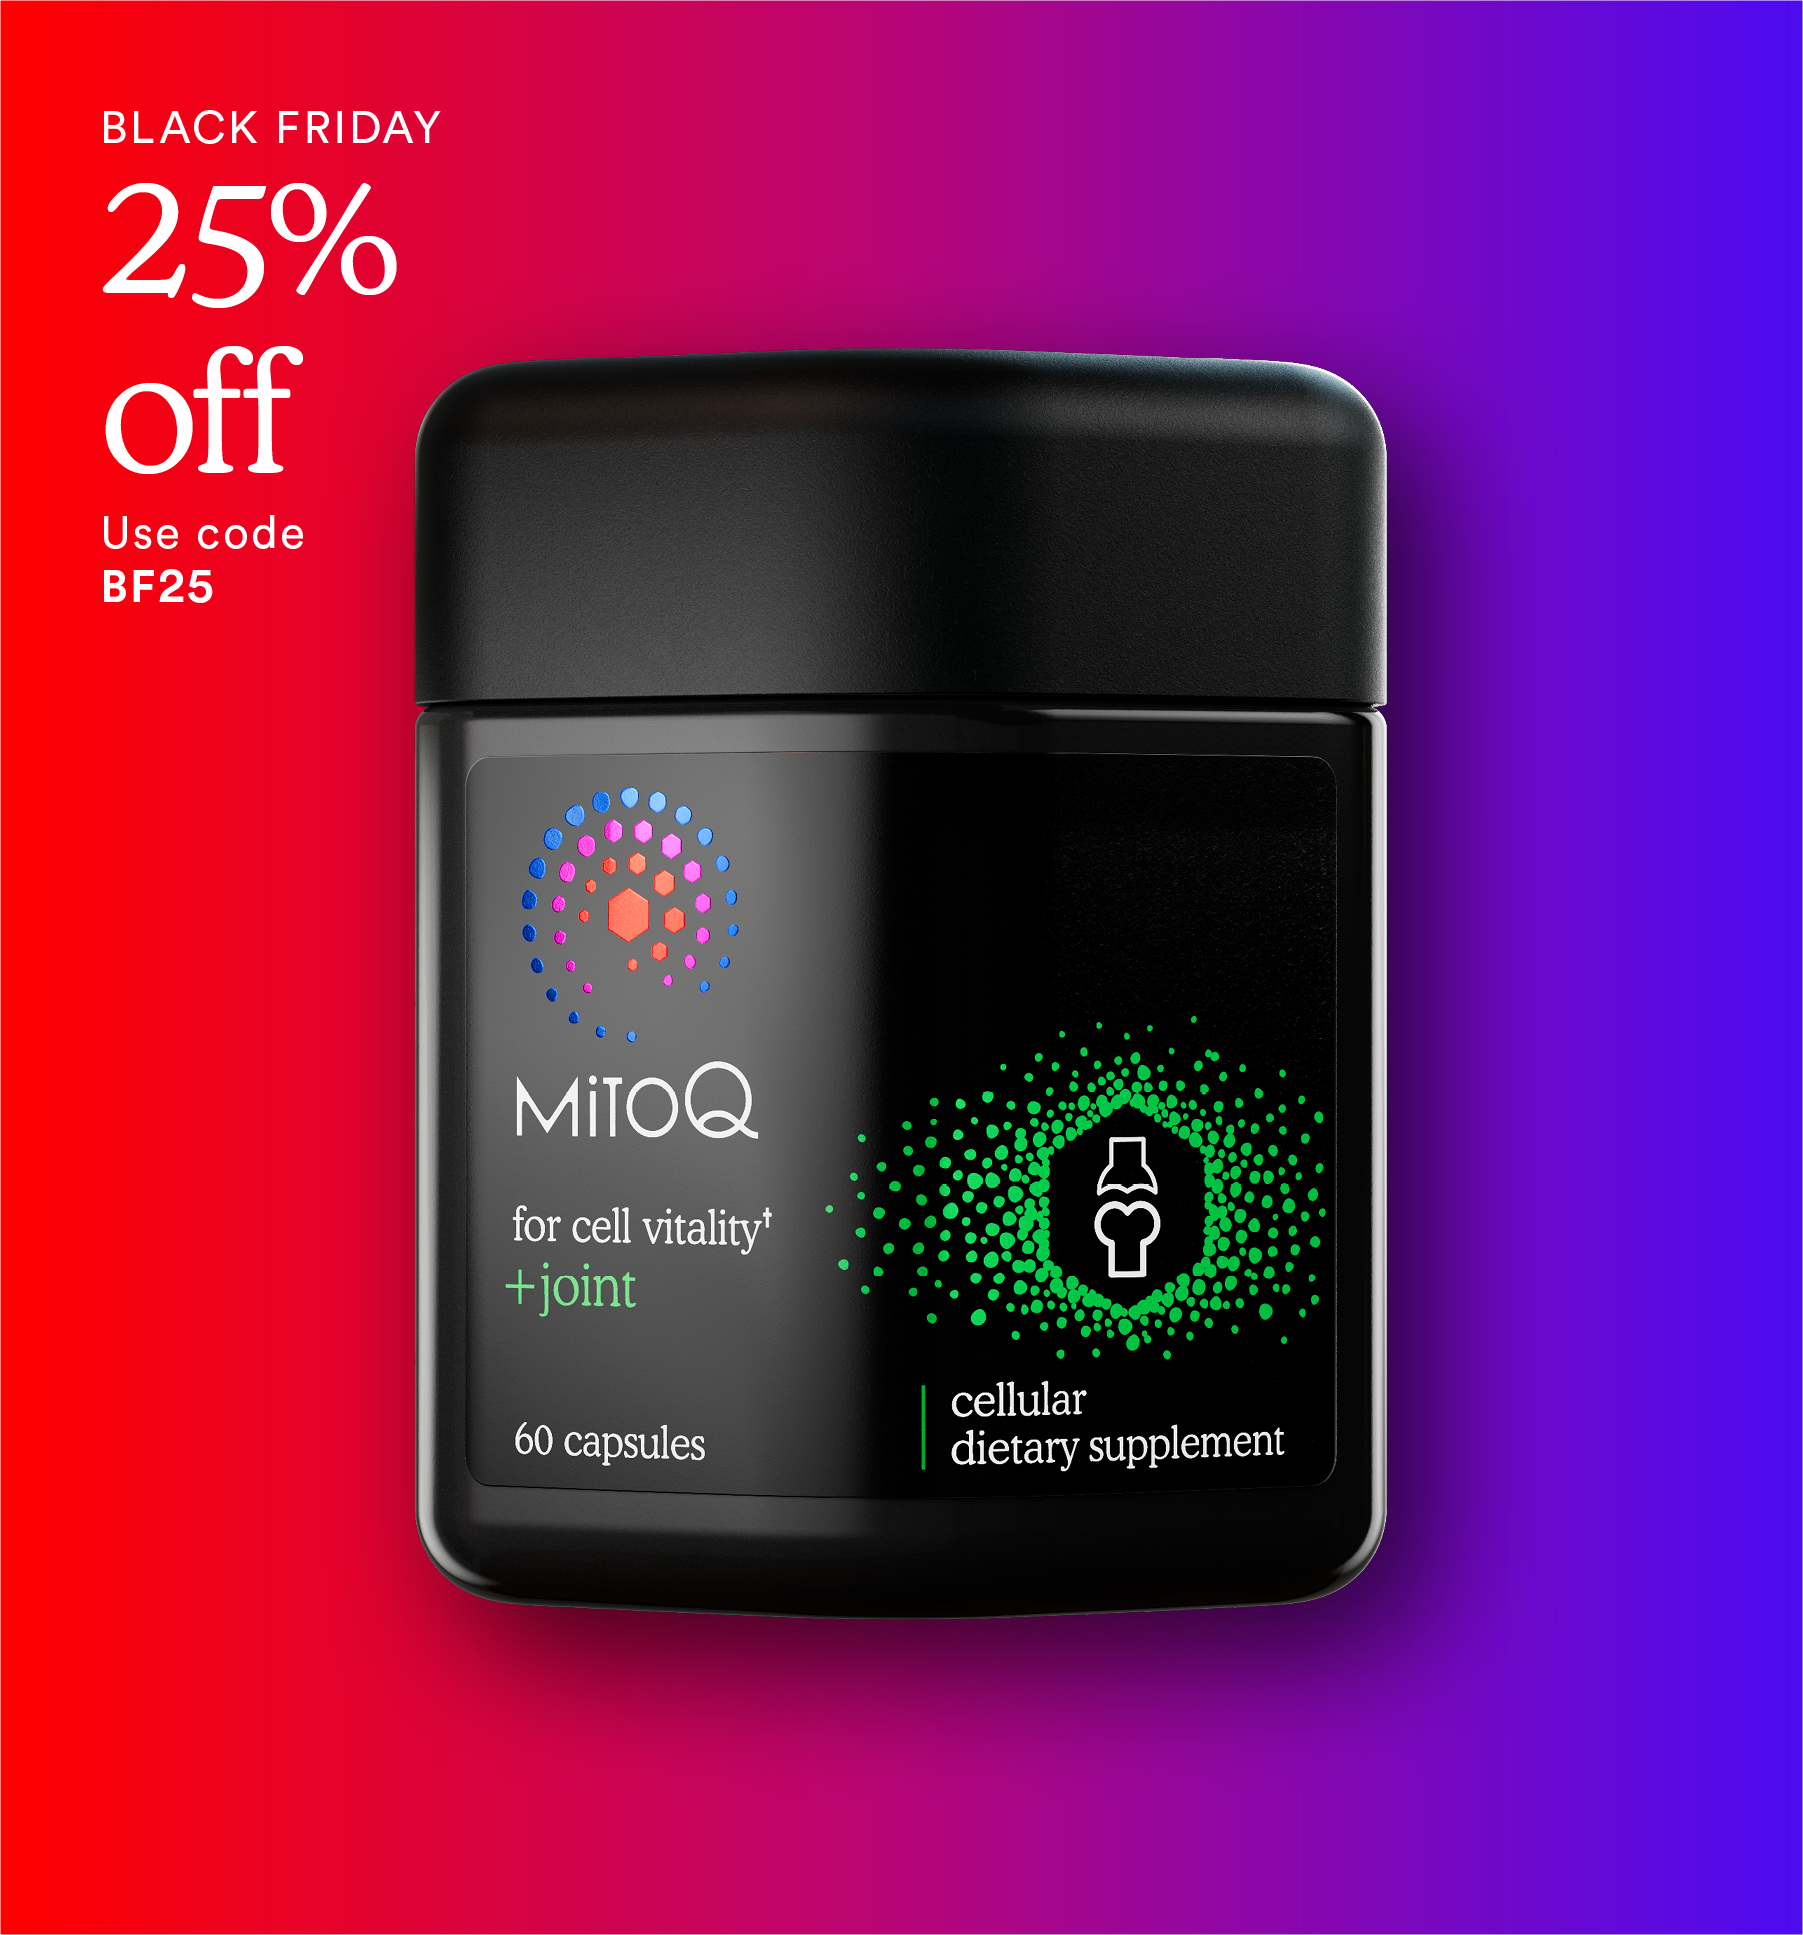 MitoQ joint Black Friday sale